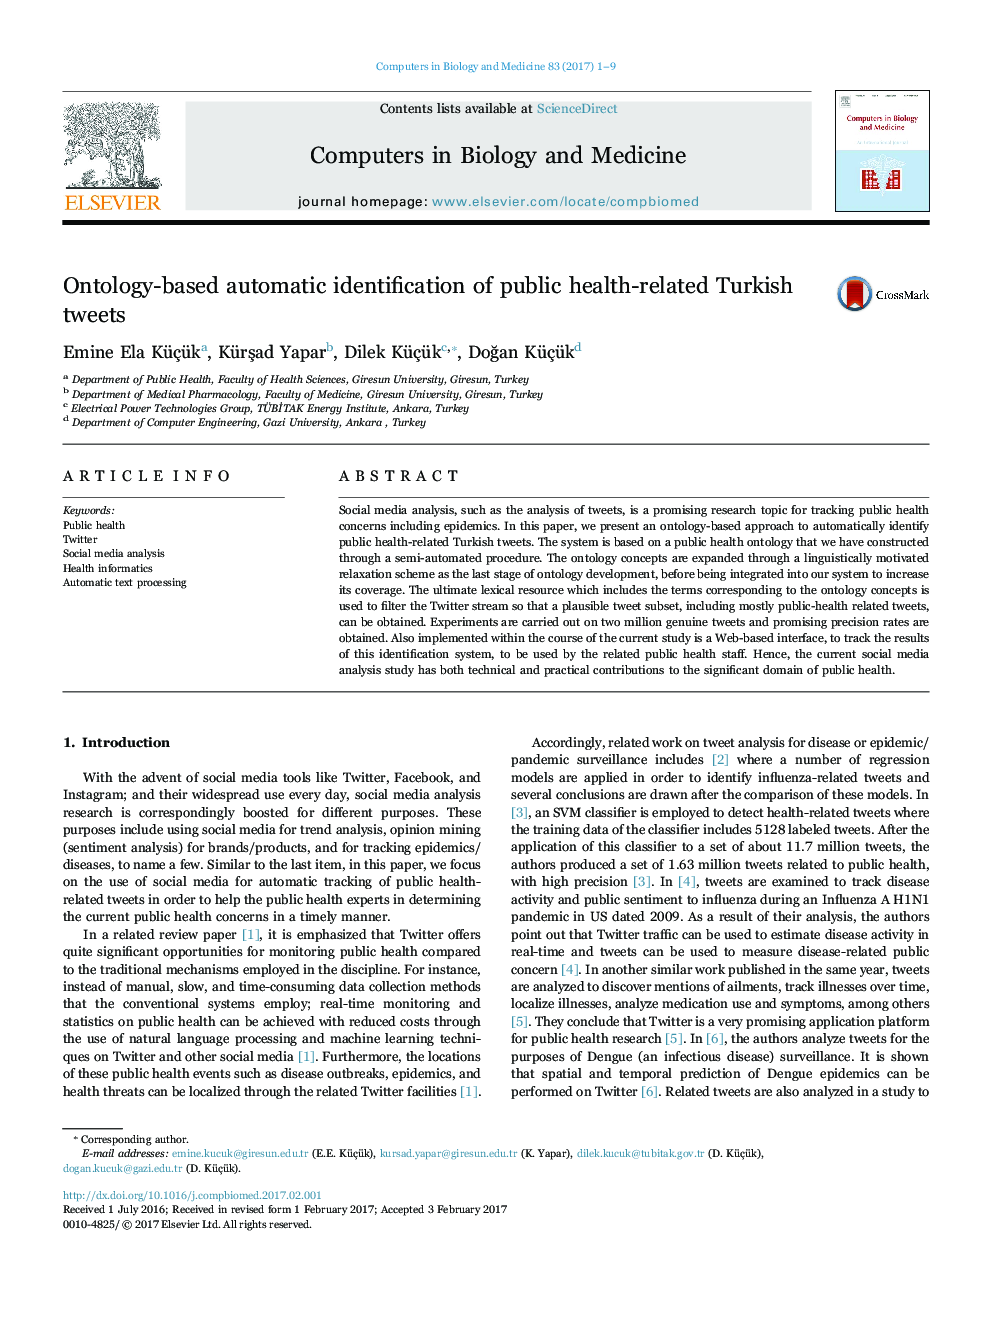 Ontology-based automatic identification of public health-related Turkish tweets